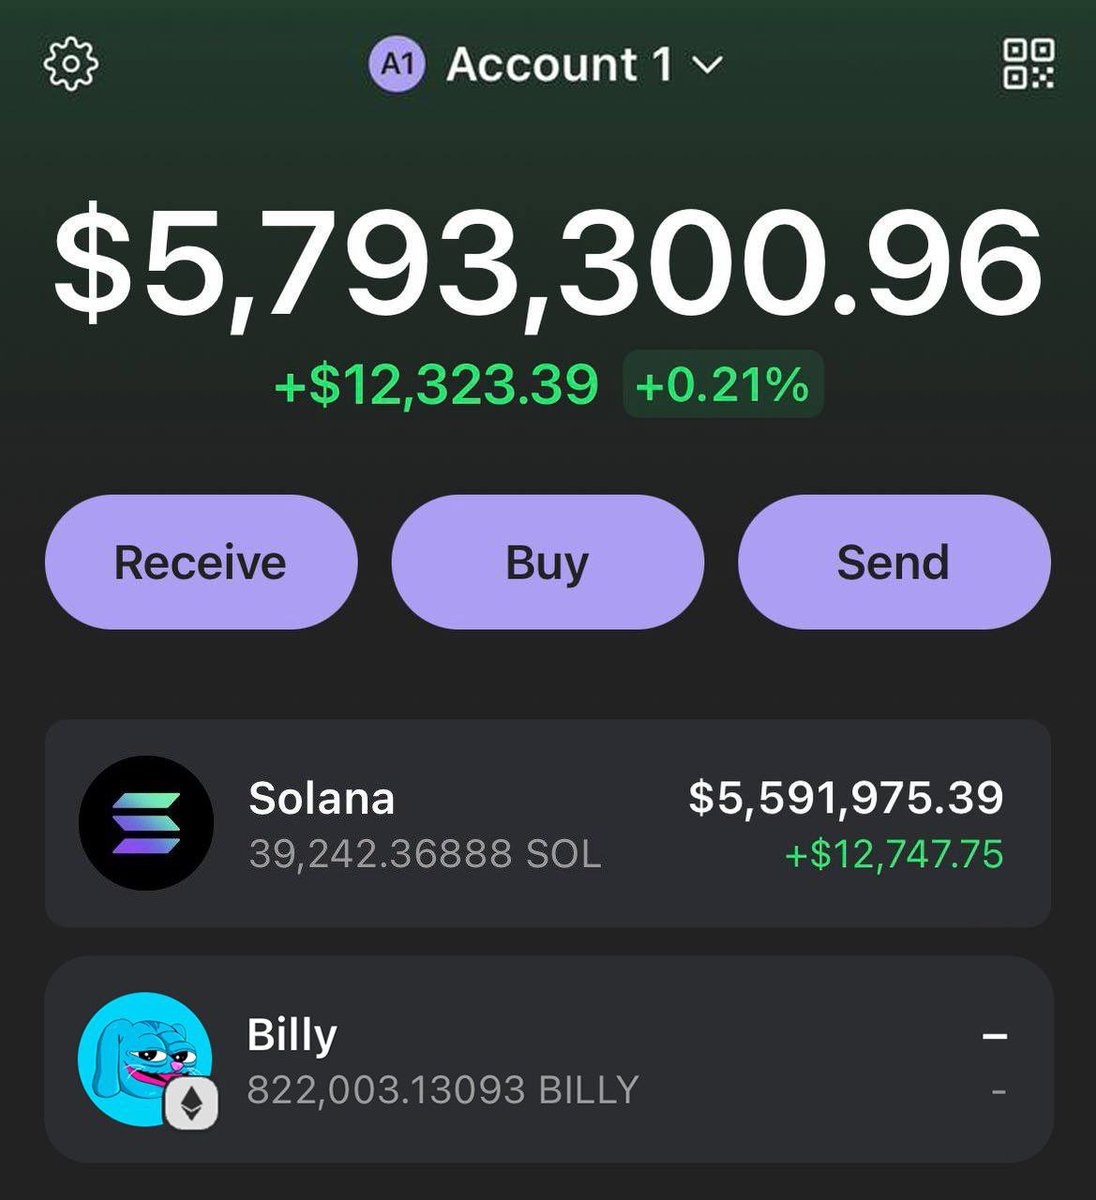 I made $5,000,000 with 1 trade.
2 days ago I bought $150,000 worth of $GME.
I just cashed out $5,000,000+ on this trade. 

To celebrate I’m GIVING AWAY $2,000 SOL to try help some people out 🩵

To enter: Like, RT and comment address

My next play is @BillyBaseCoin, they just